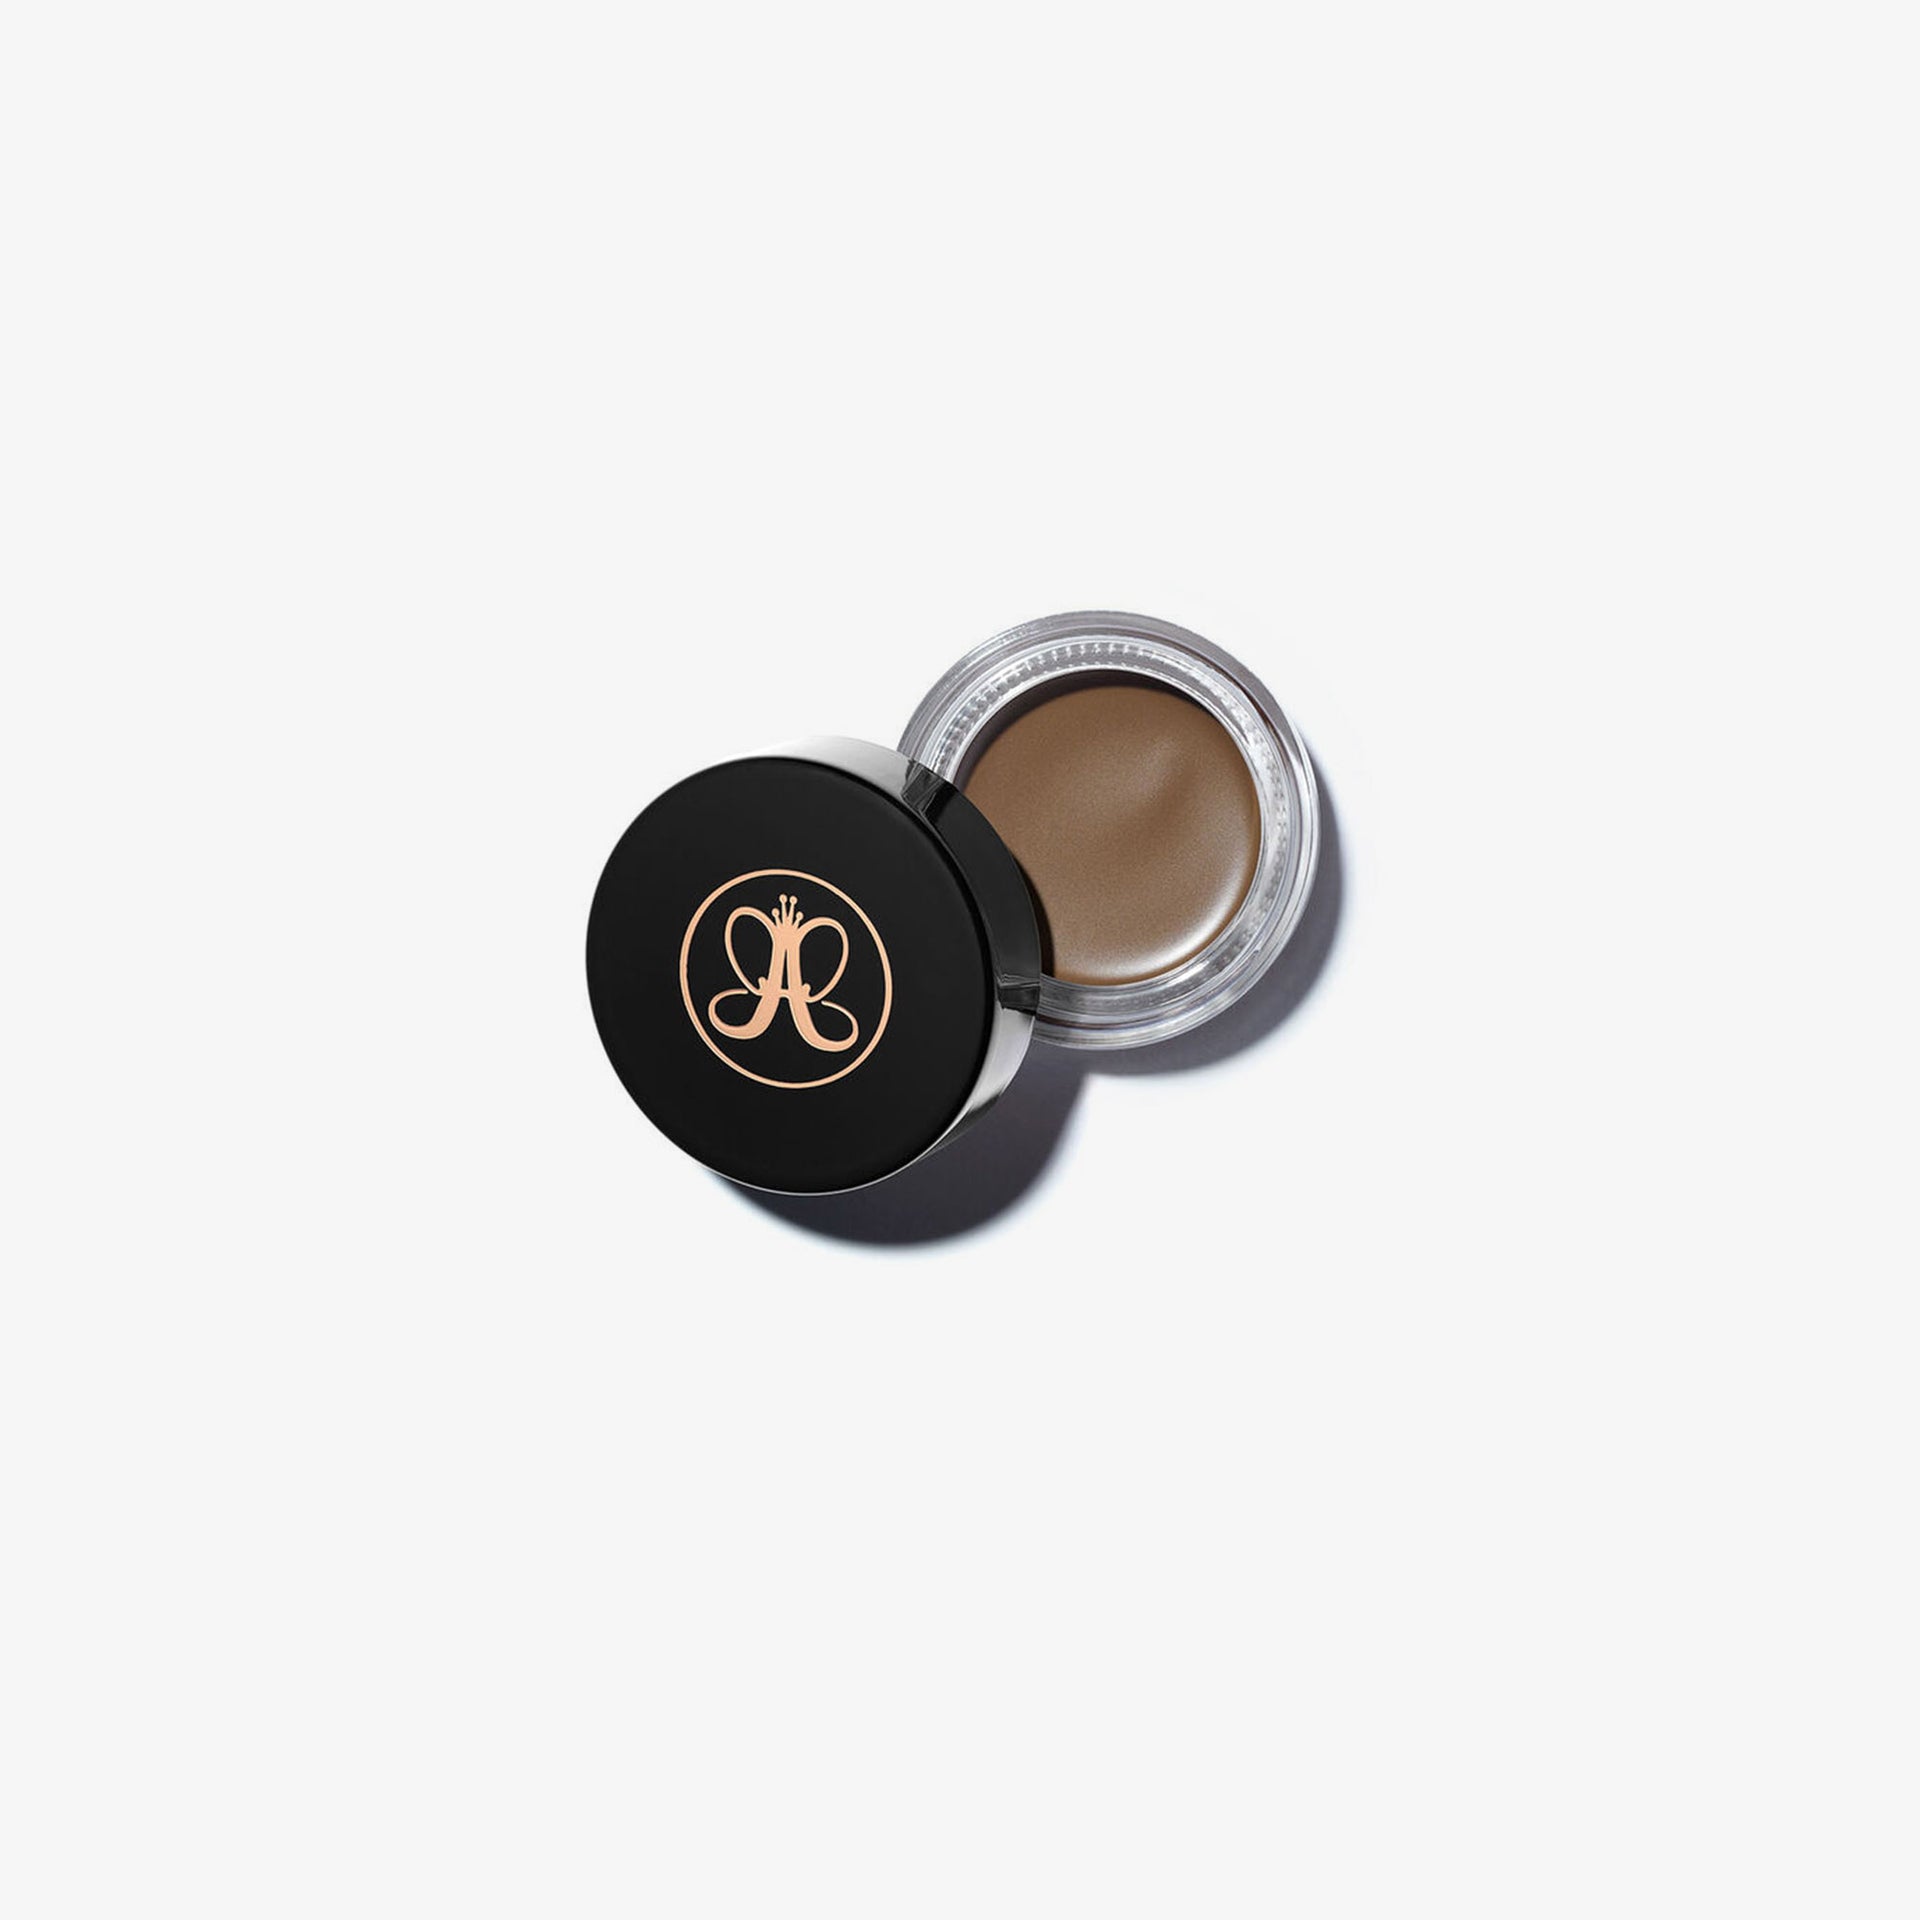 Blonde | Product Flat | DIPBROW® Pomade - Blonde Product Flat 